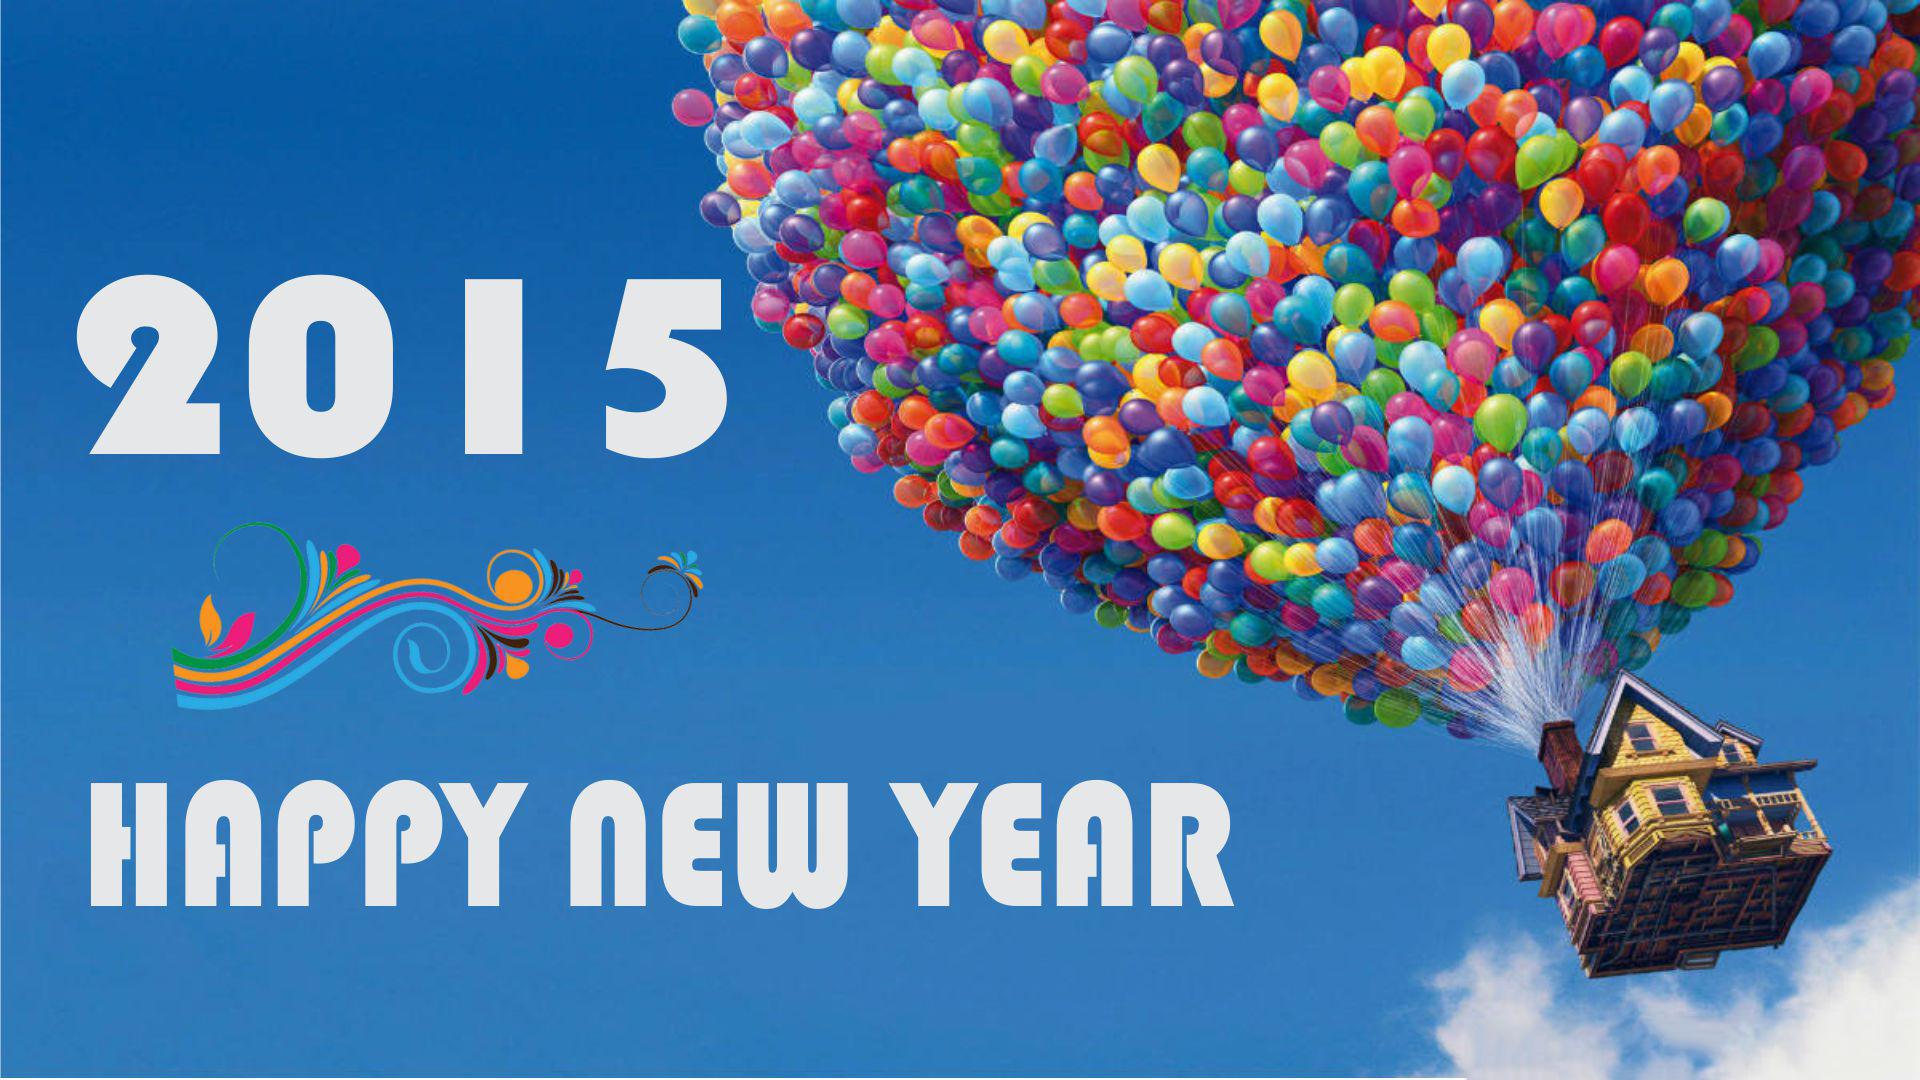 2015 New Years Eve Clip Art | Wallpapers HD | Wallpaper High Quality